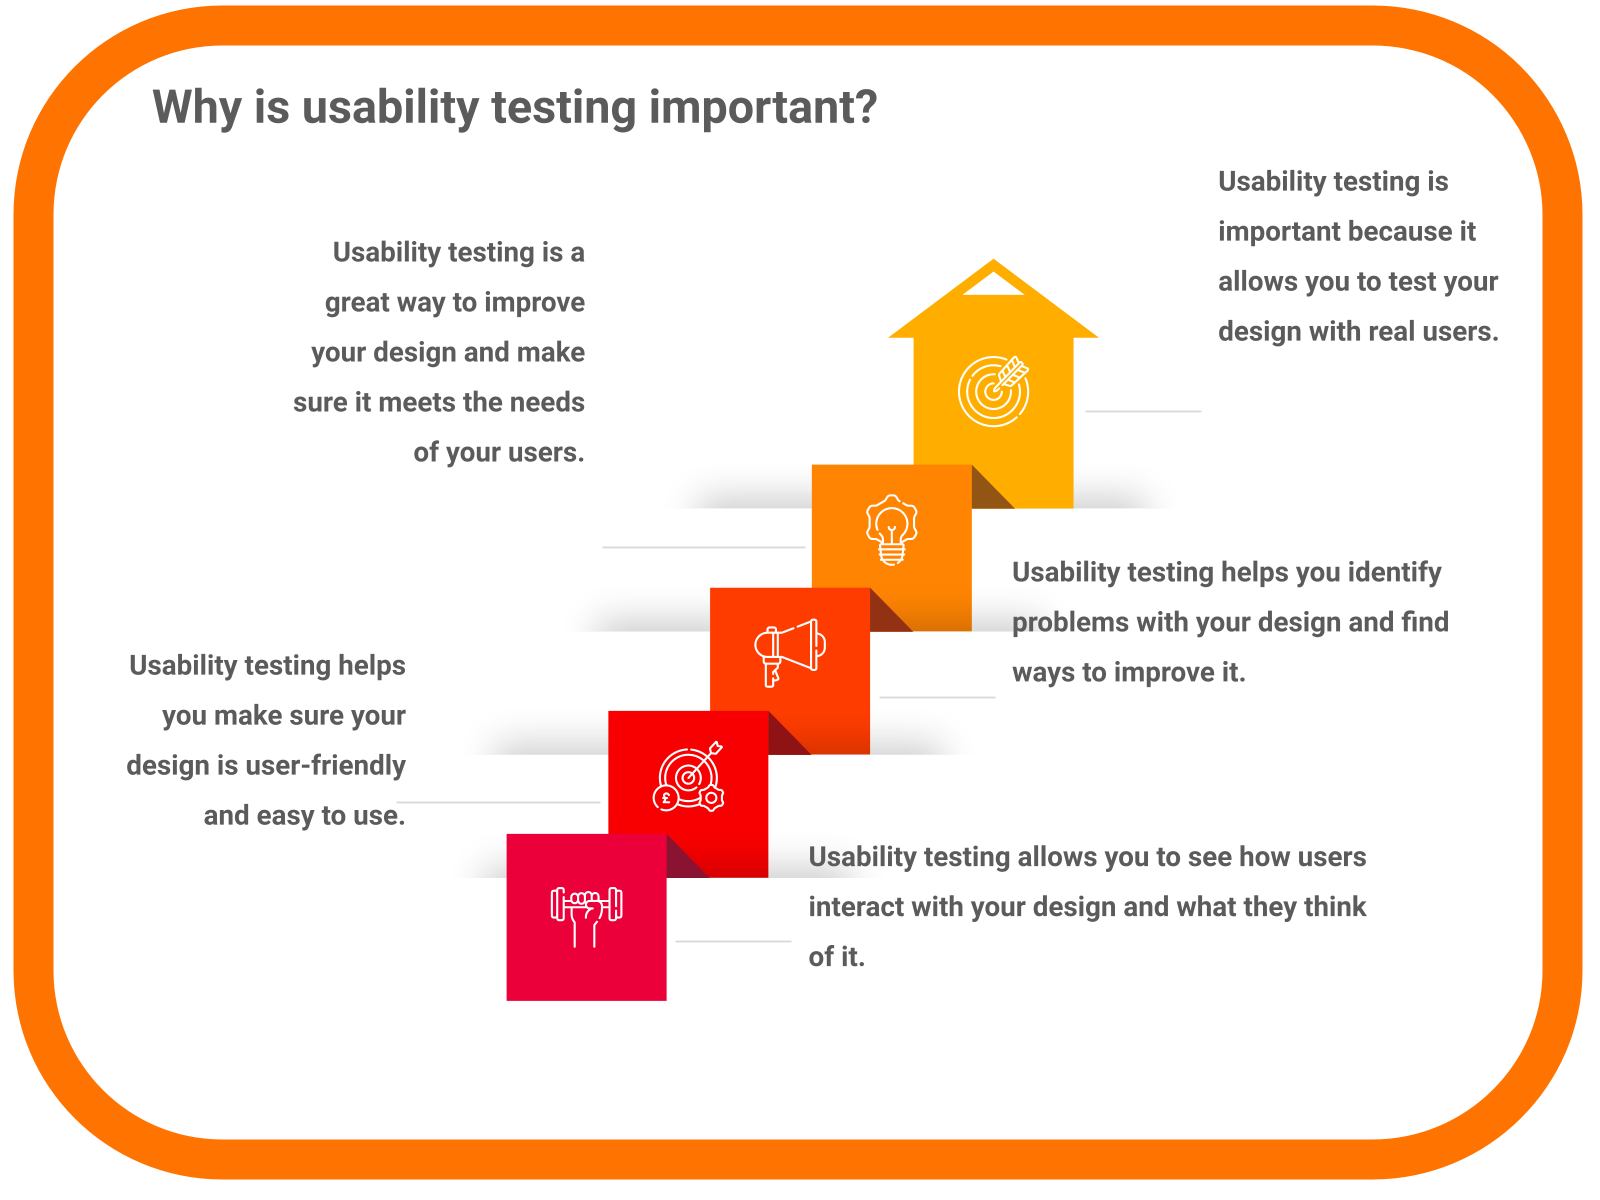 What is usability testing?